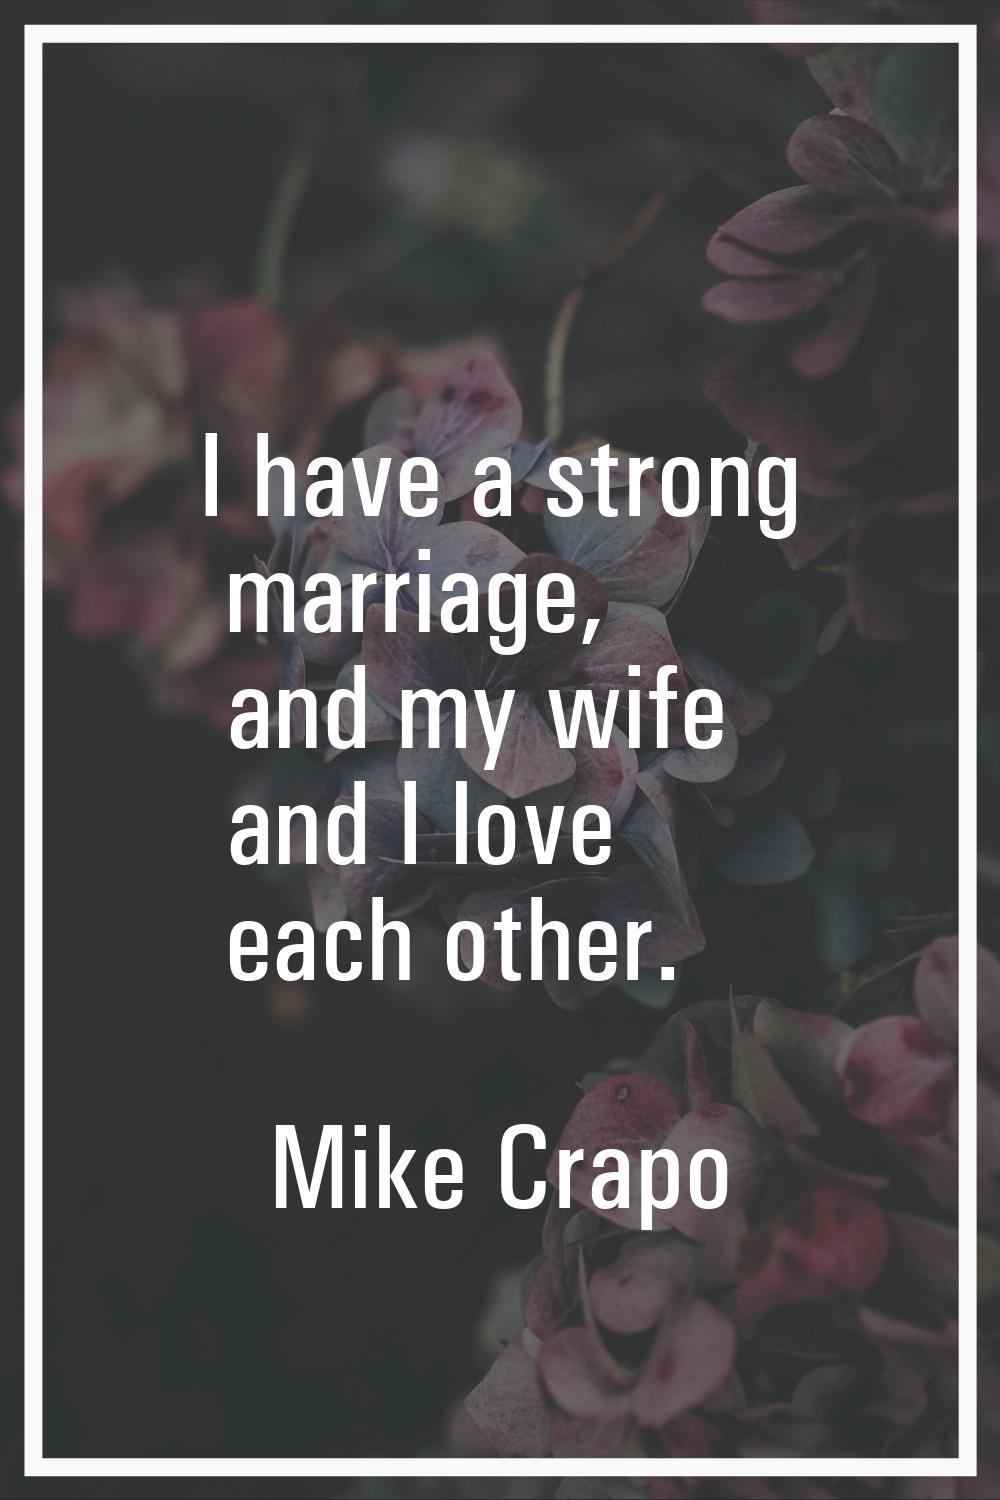 I have a strong marriage, and my wife and I love each other.